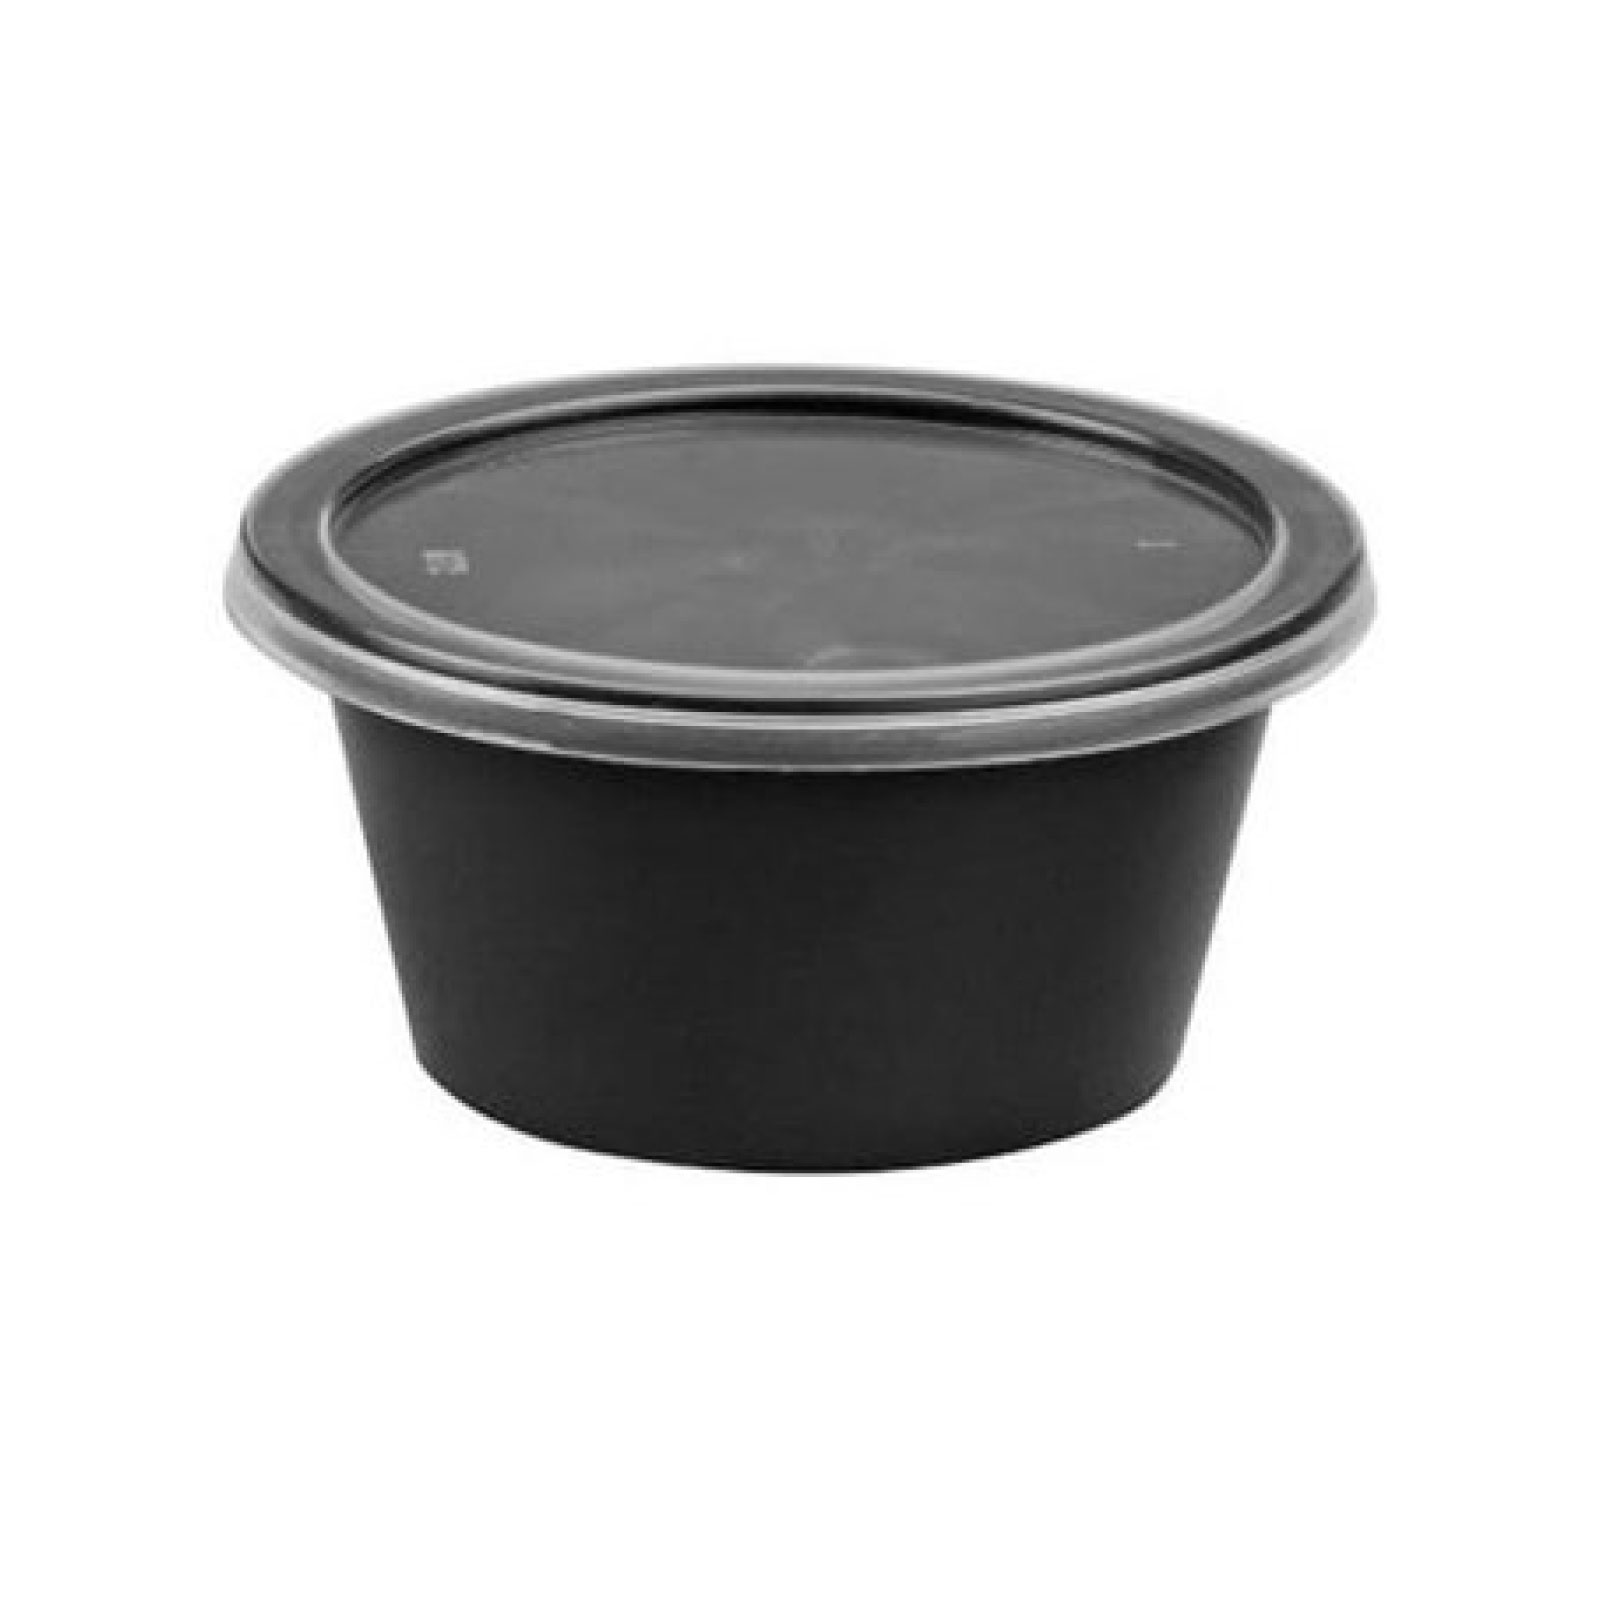 Round 100 Ml Black Disposable Plastic Food Container at Rs 2.70